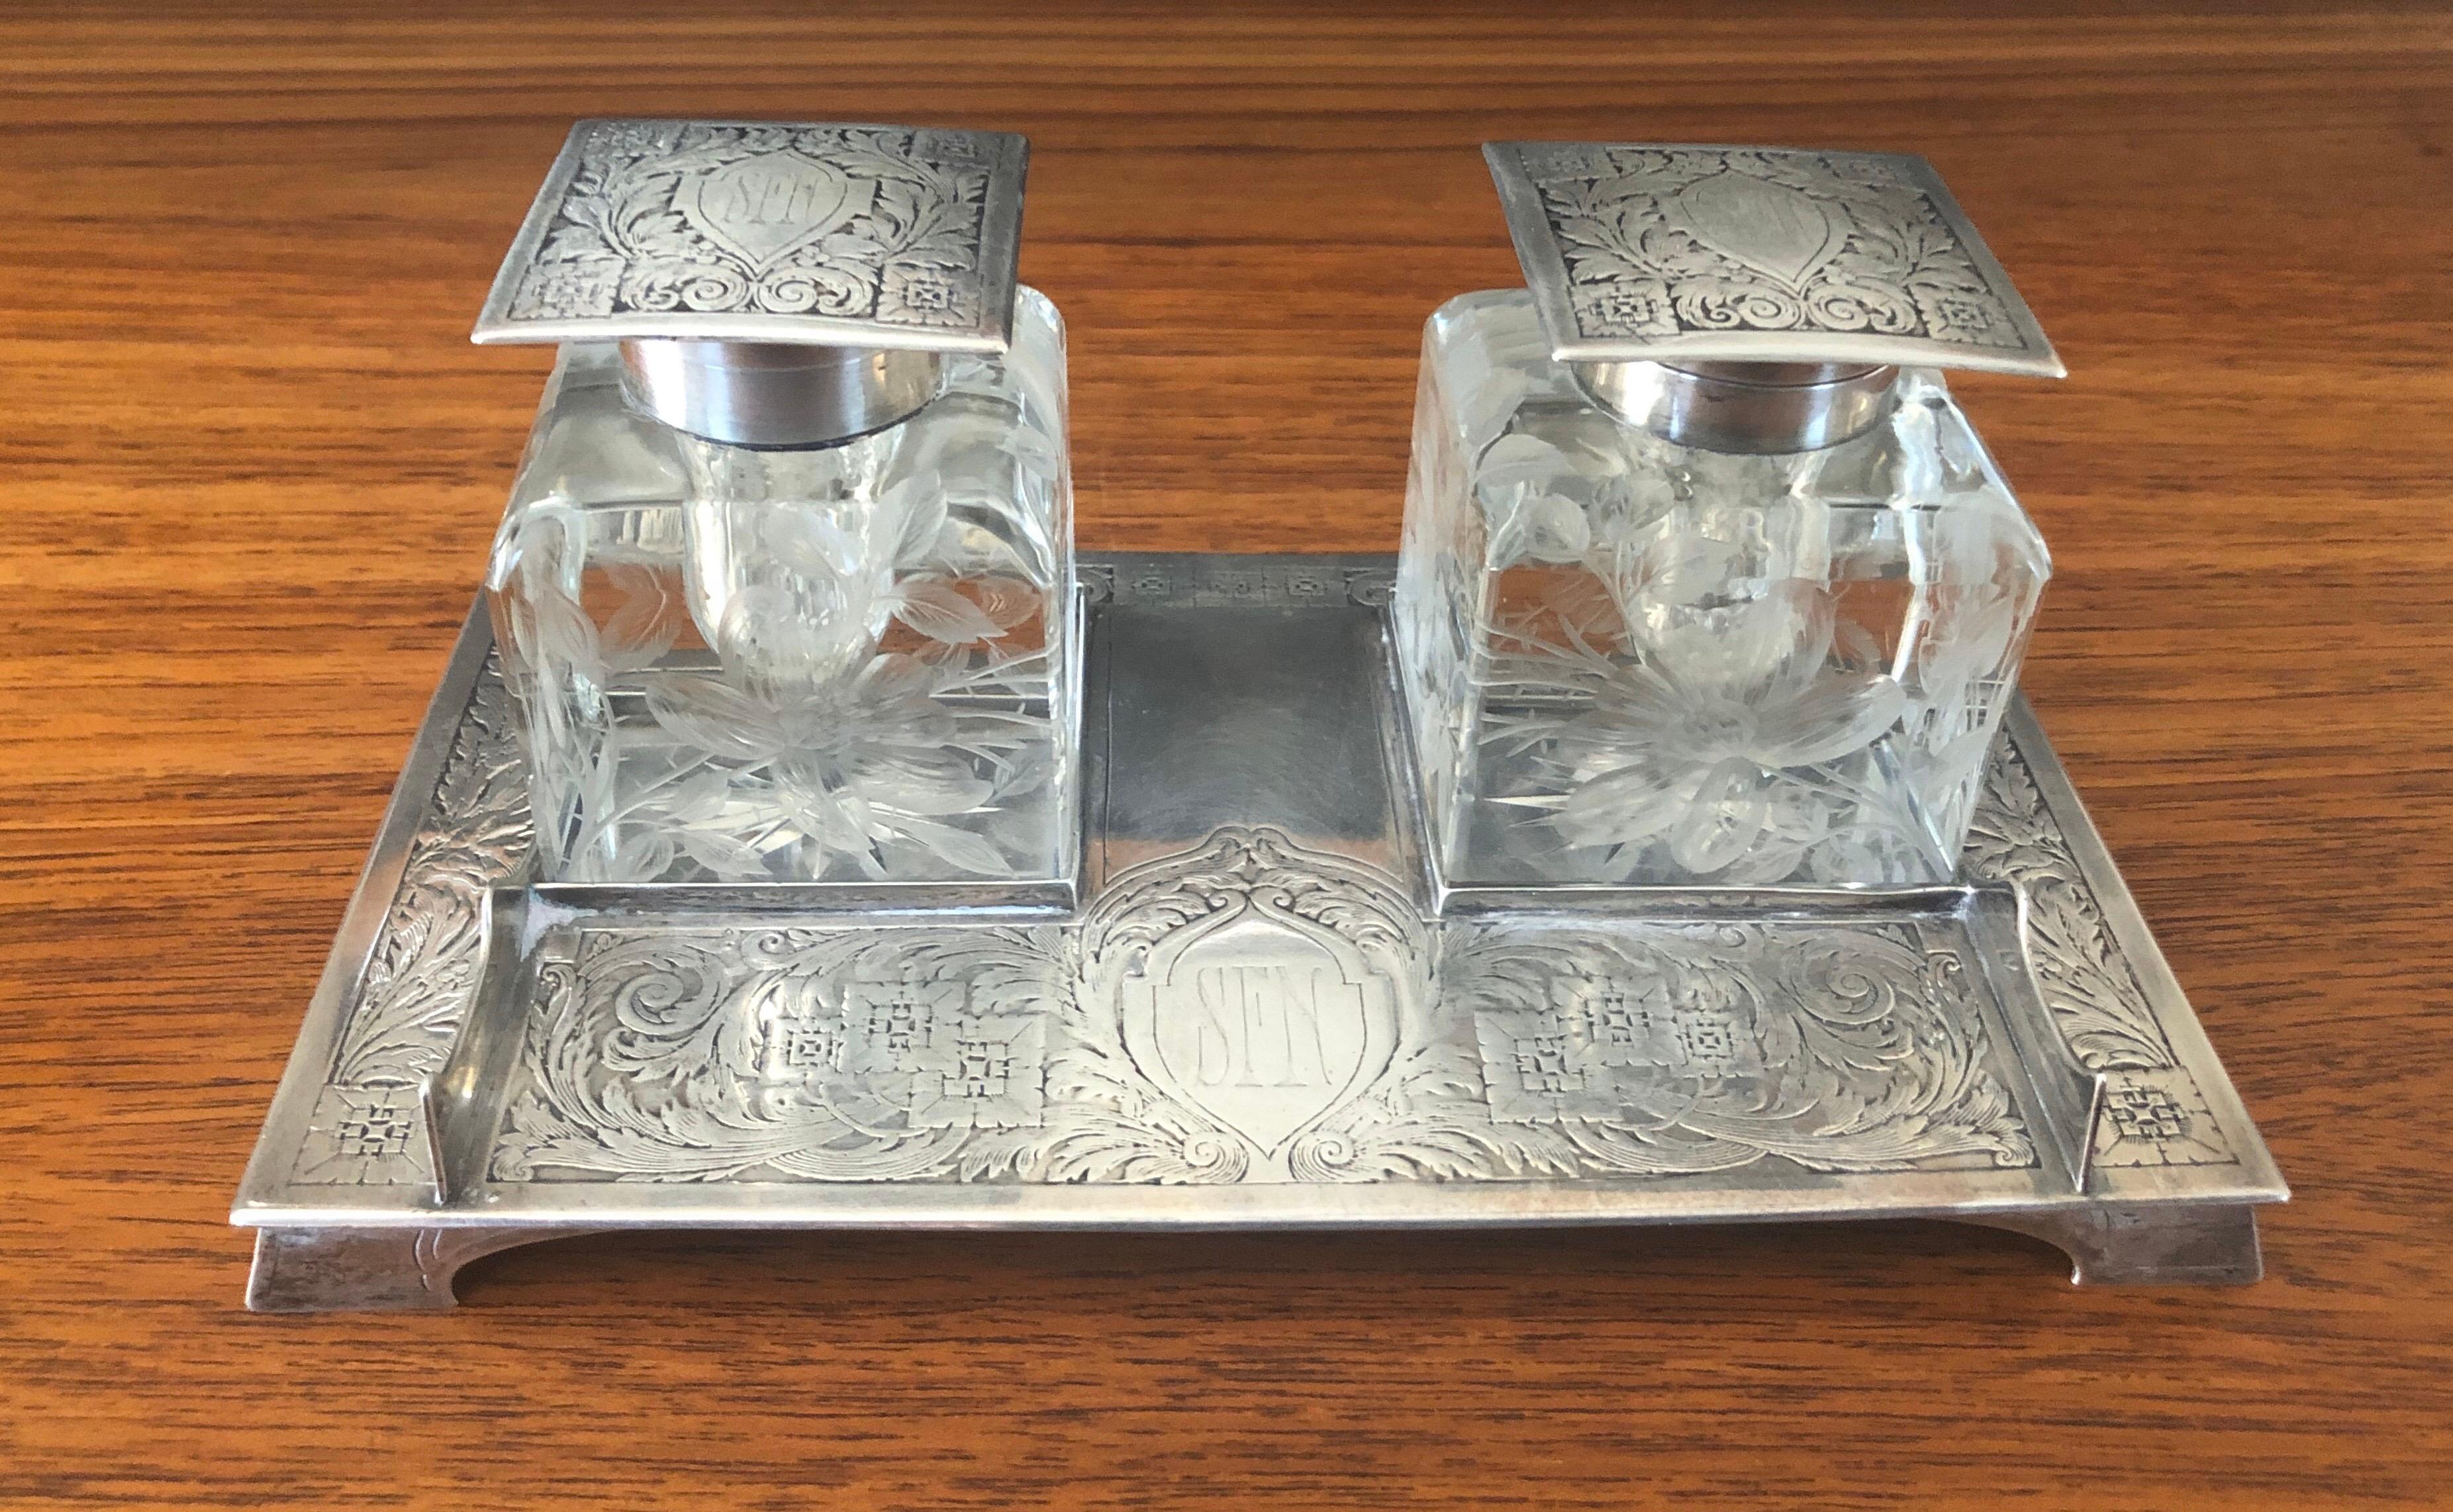 American Antique Art Nouveau Double Inkwell on Sterling Silver Tray by J E Caldwell & Co. For Sale